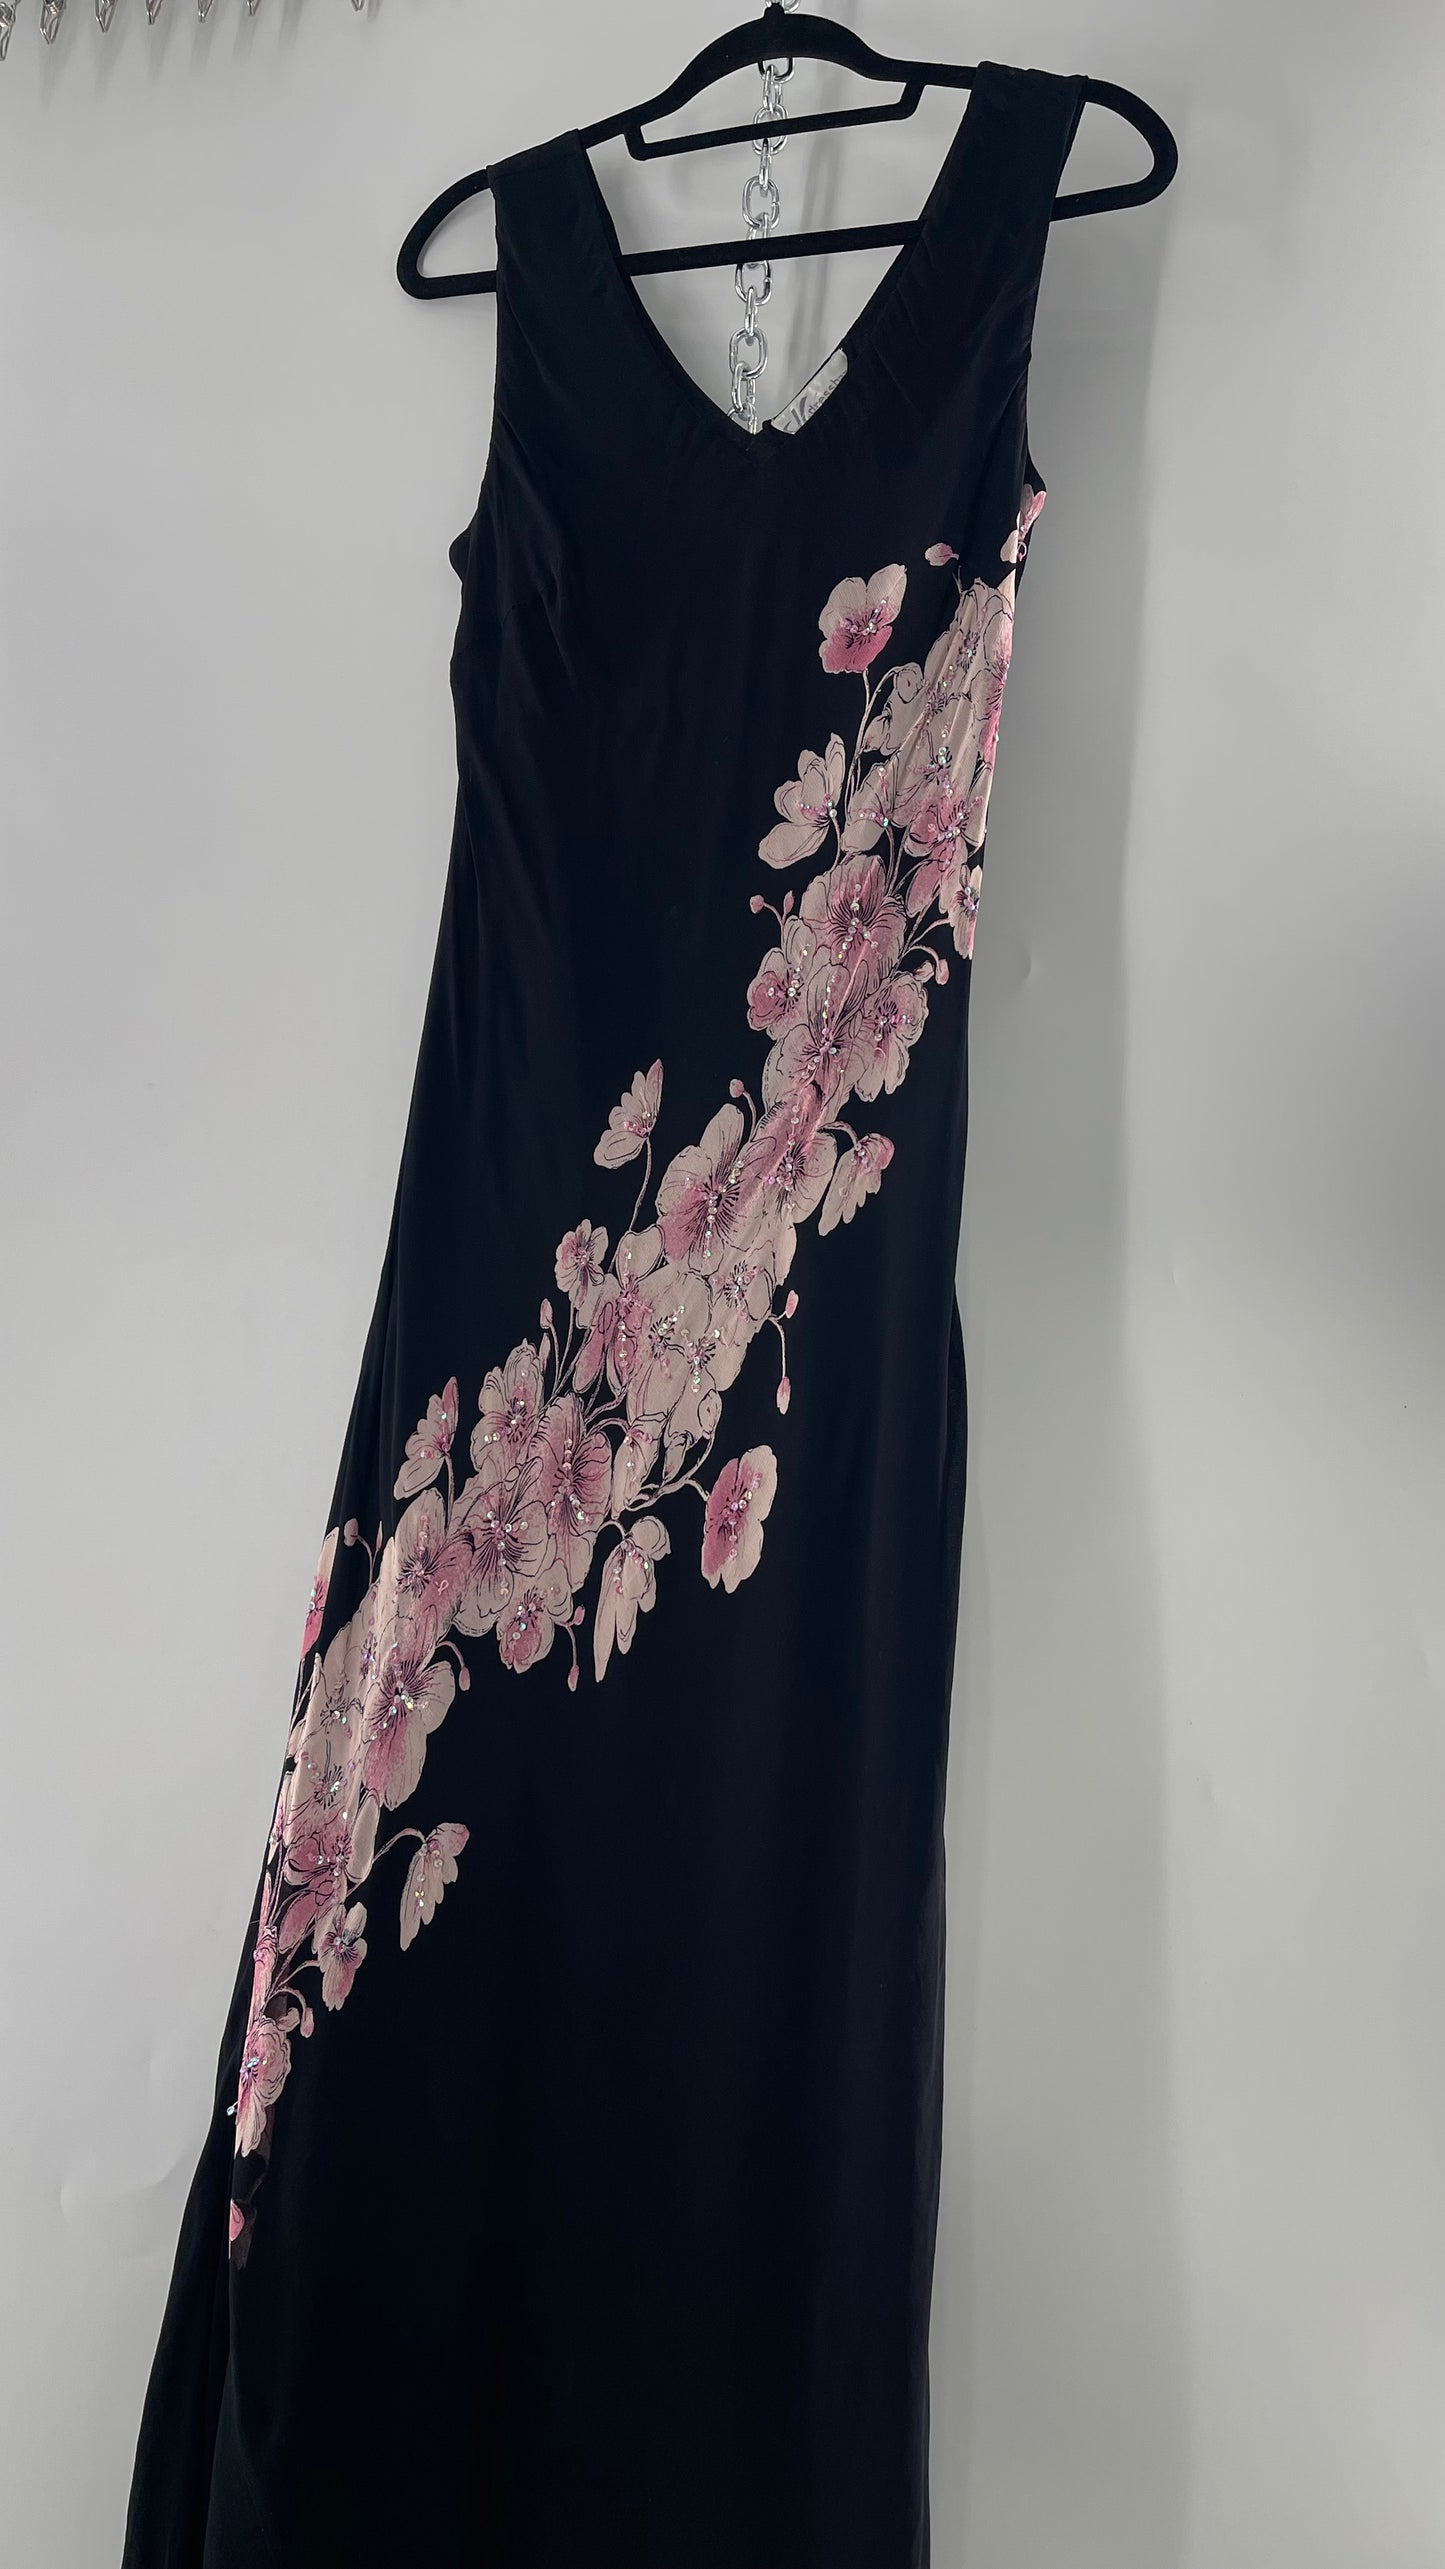 Vintage Dress Barn Black Slinky Maxi Dress with Pink Floral Graphic and Sequins (L)